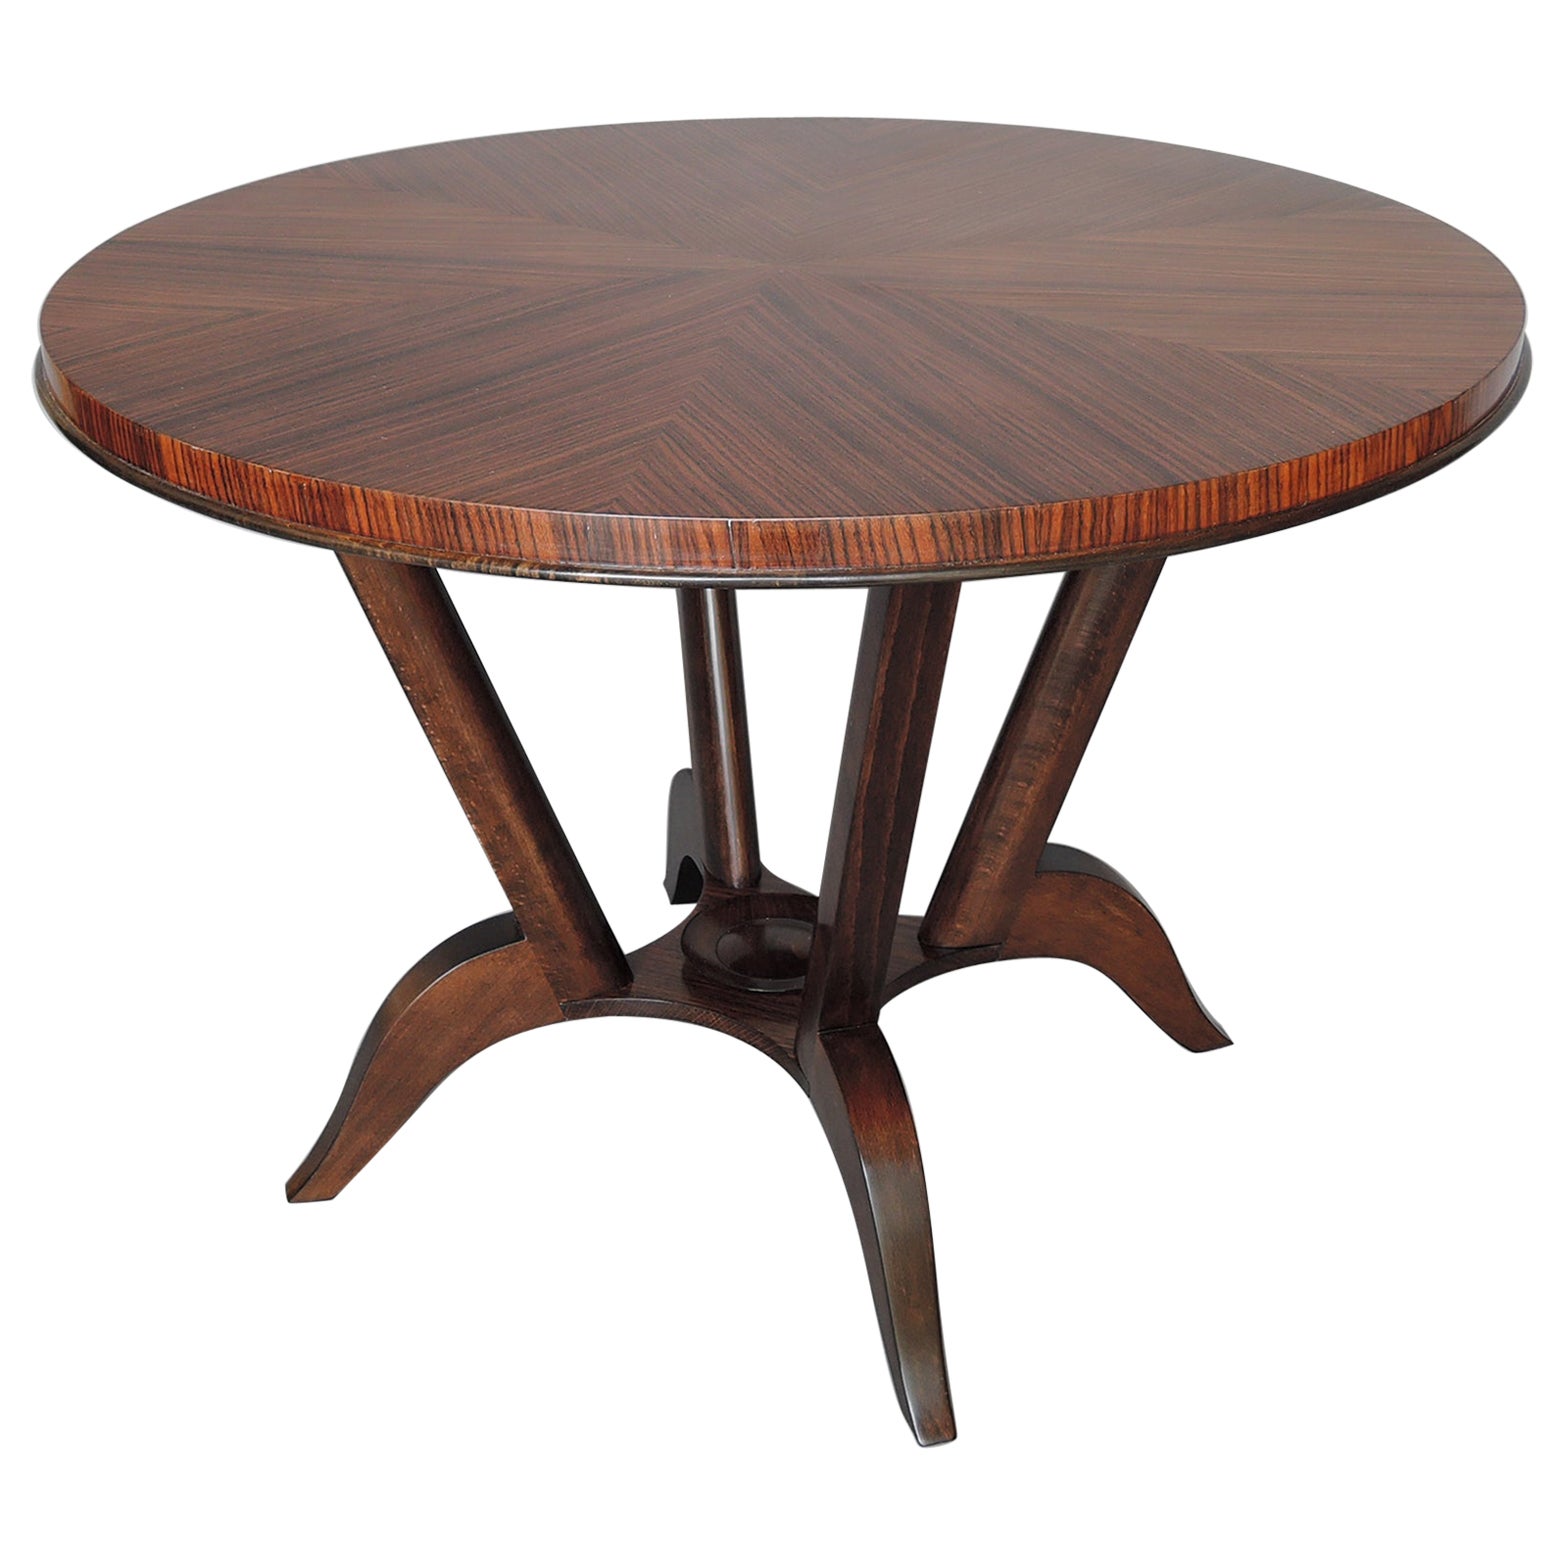 French Art Deco Rosewood Gueridon with a Four Curved-Leg Pedestal For Sale